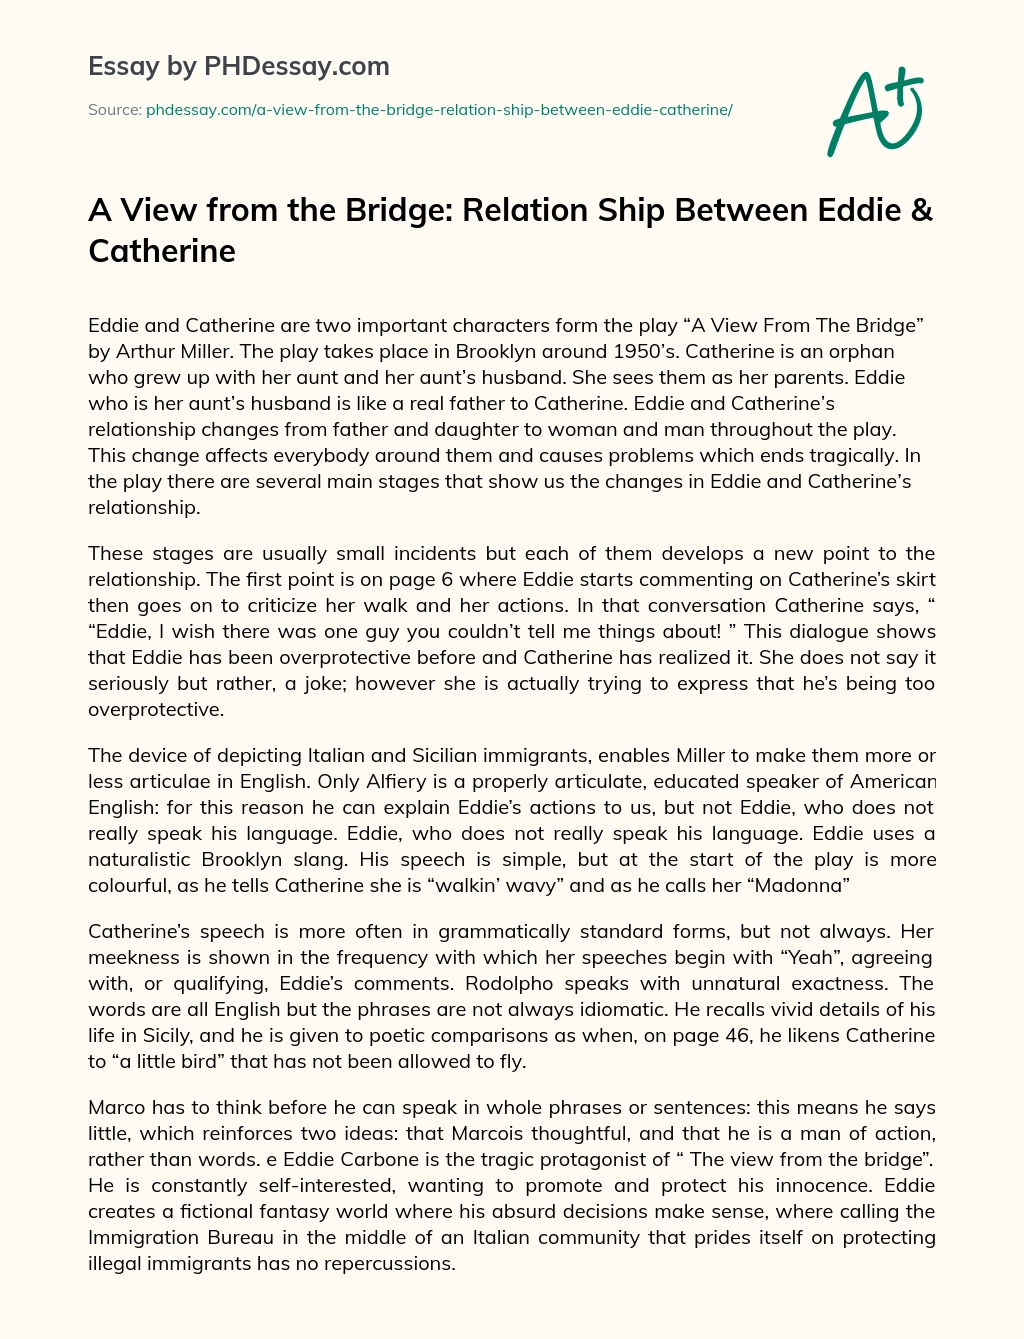 a view from the bridge eddie and catherine relationship essay